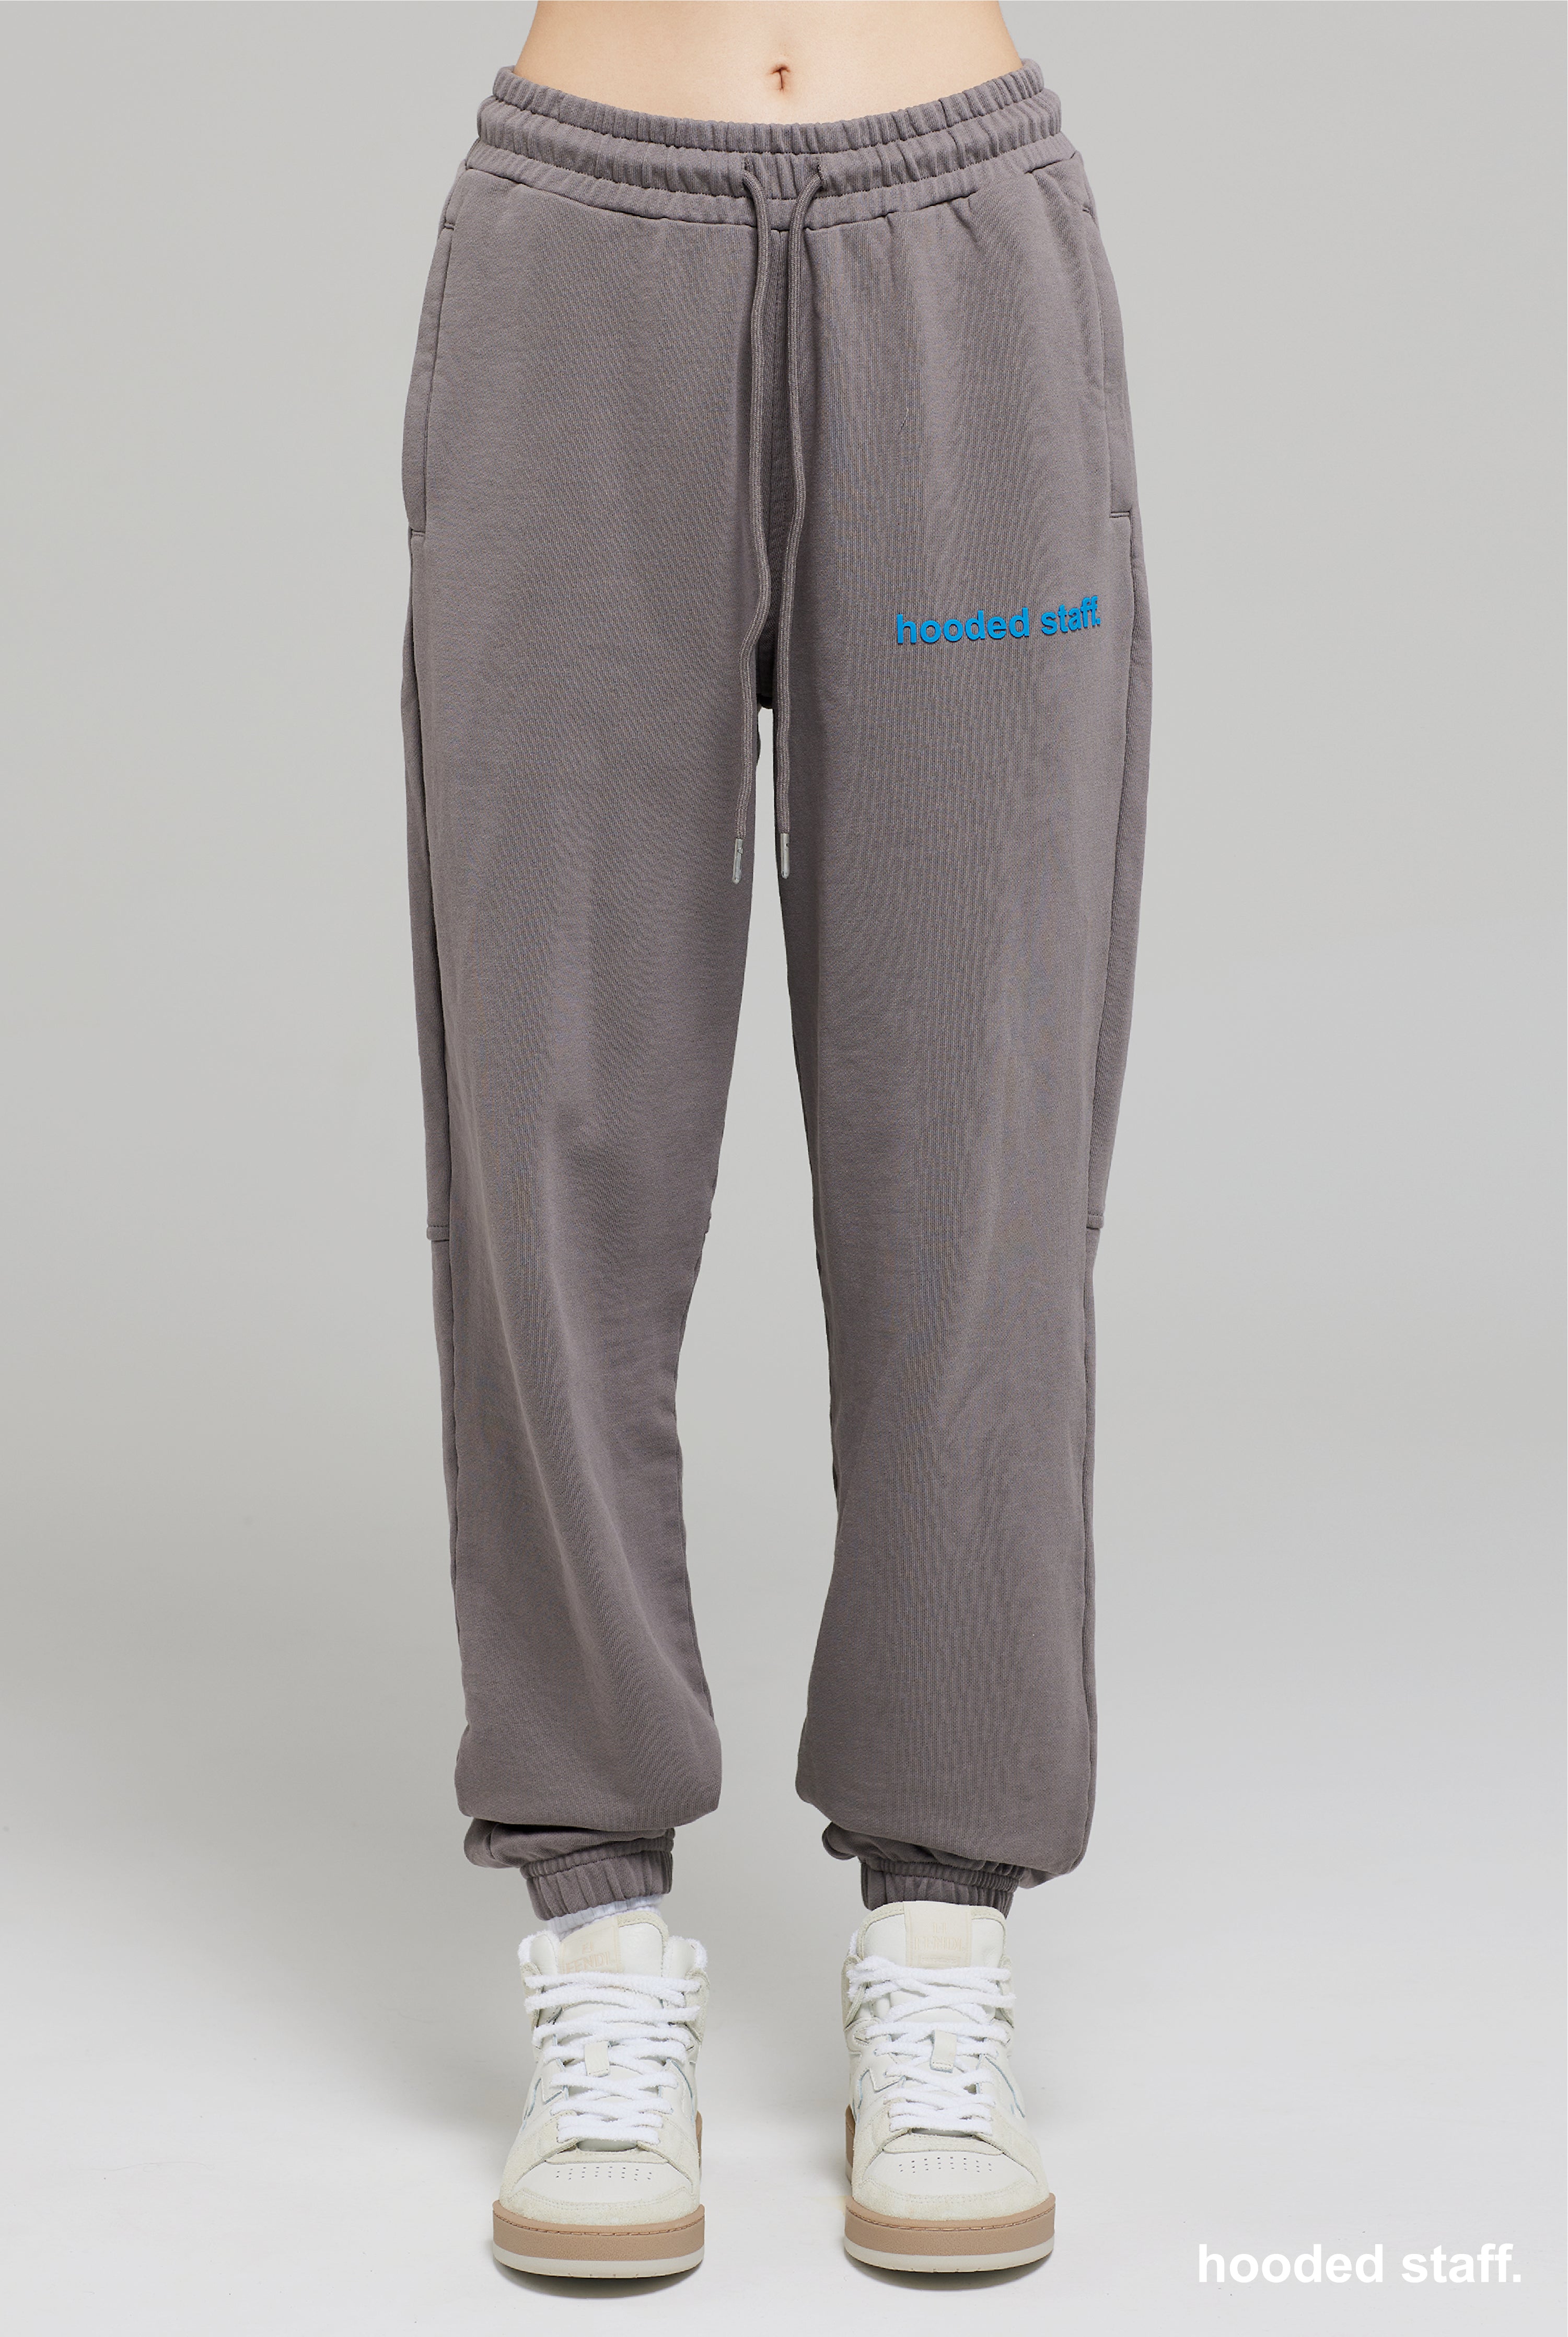 CORE JOGGER STONE – hooded staff.